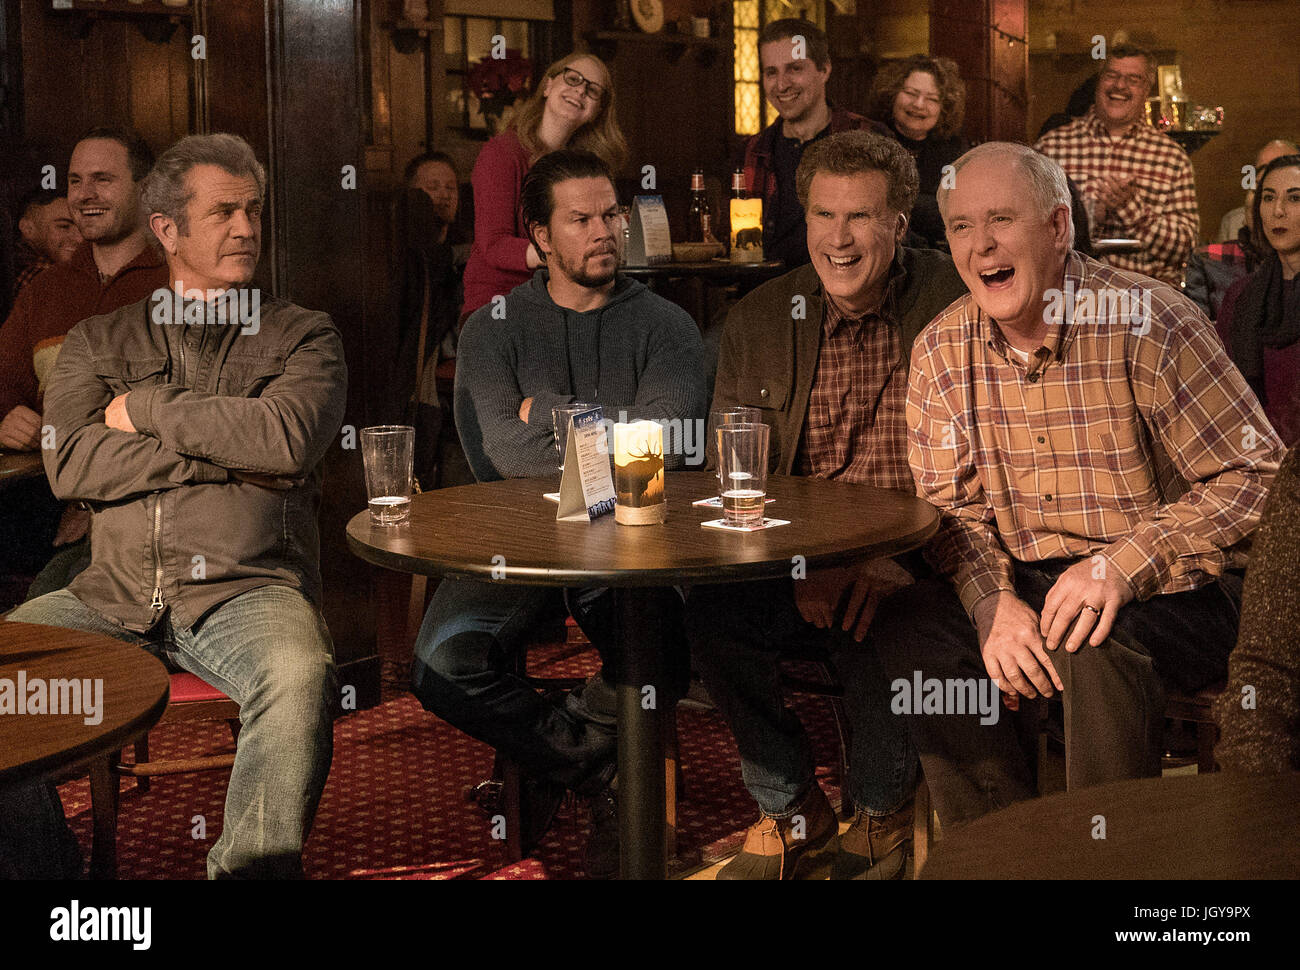 RELEASE DATE: november 10, 2017 TITLE: Daddy's Home 2 STUDIO: Paramount Pictures DIRECTOR: Sean Anders PLOT: Brad and Dusty must deal with their intrusive fathers during the holidays STARRING: MEL GIBSON as Kurt, MARK WAHLBERG as Dusty, WILL FERRELL as Brad, JOHN LITHGOW as Don. (Credit Image: © Paramount Pictures/Entertainment Pictures) Stock Photo